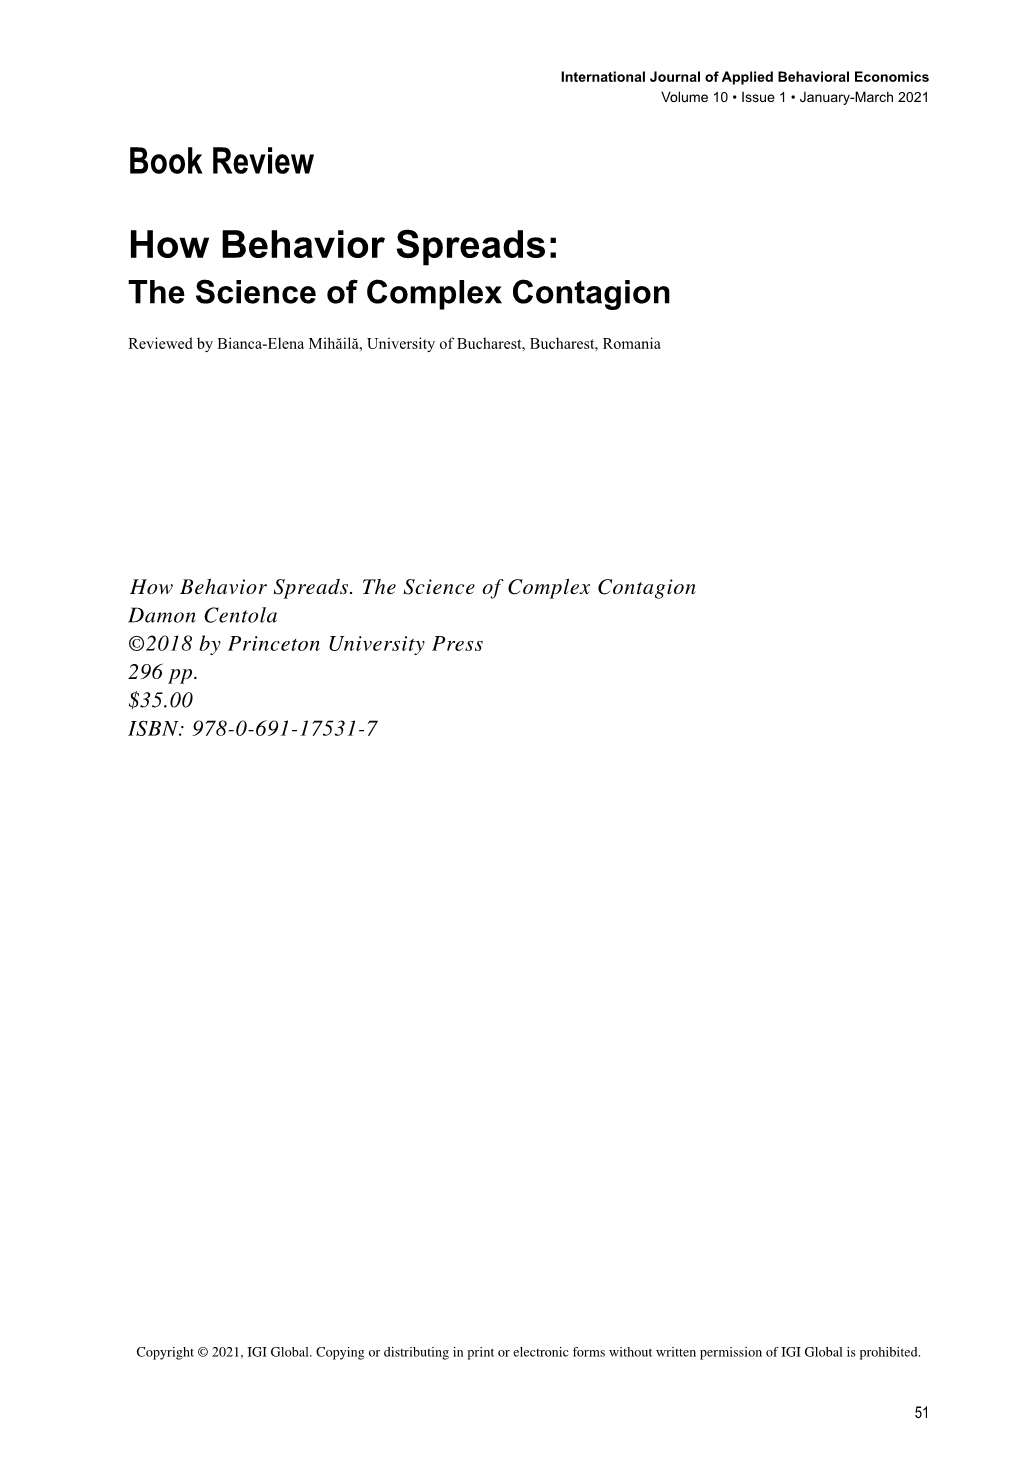 How Behavior Spreads: the Science of Complex Contagion